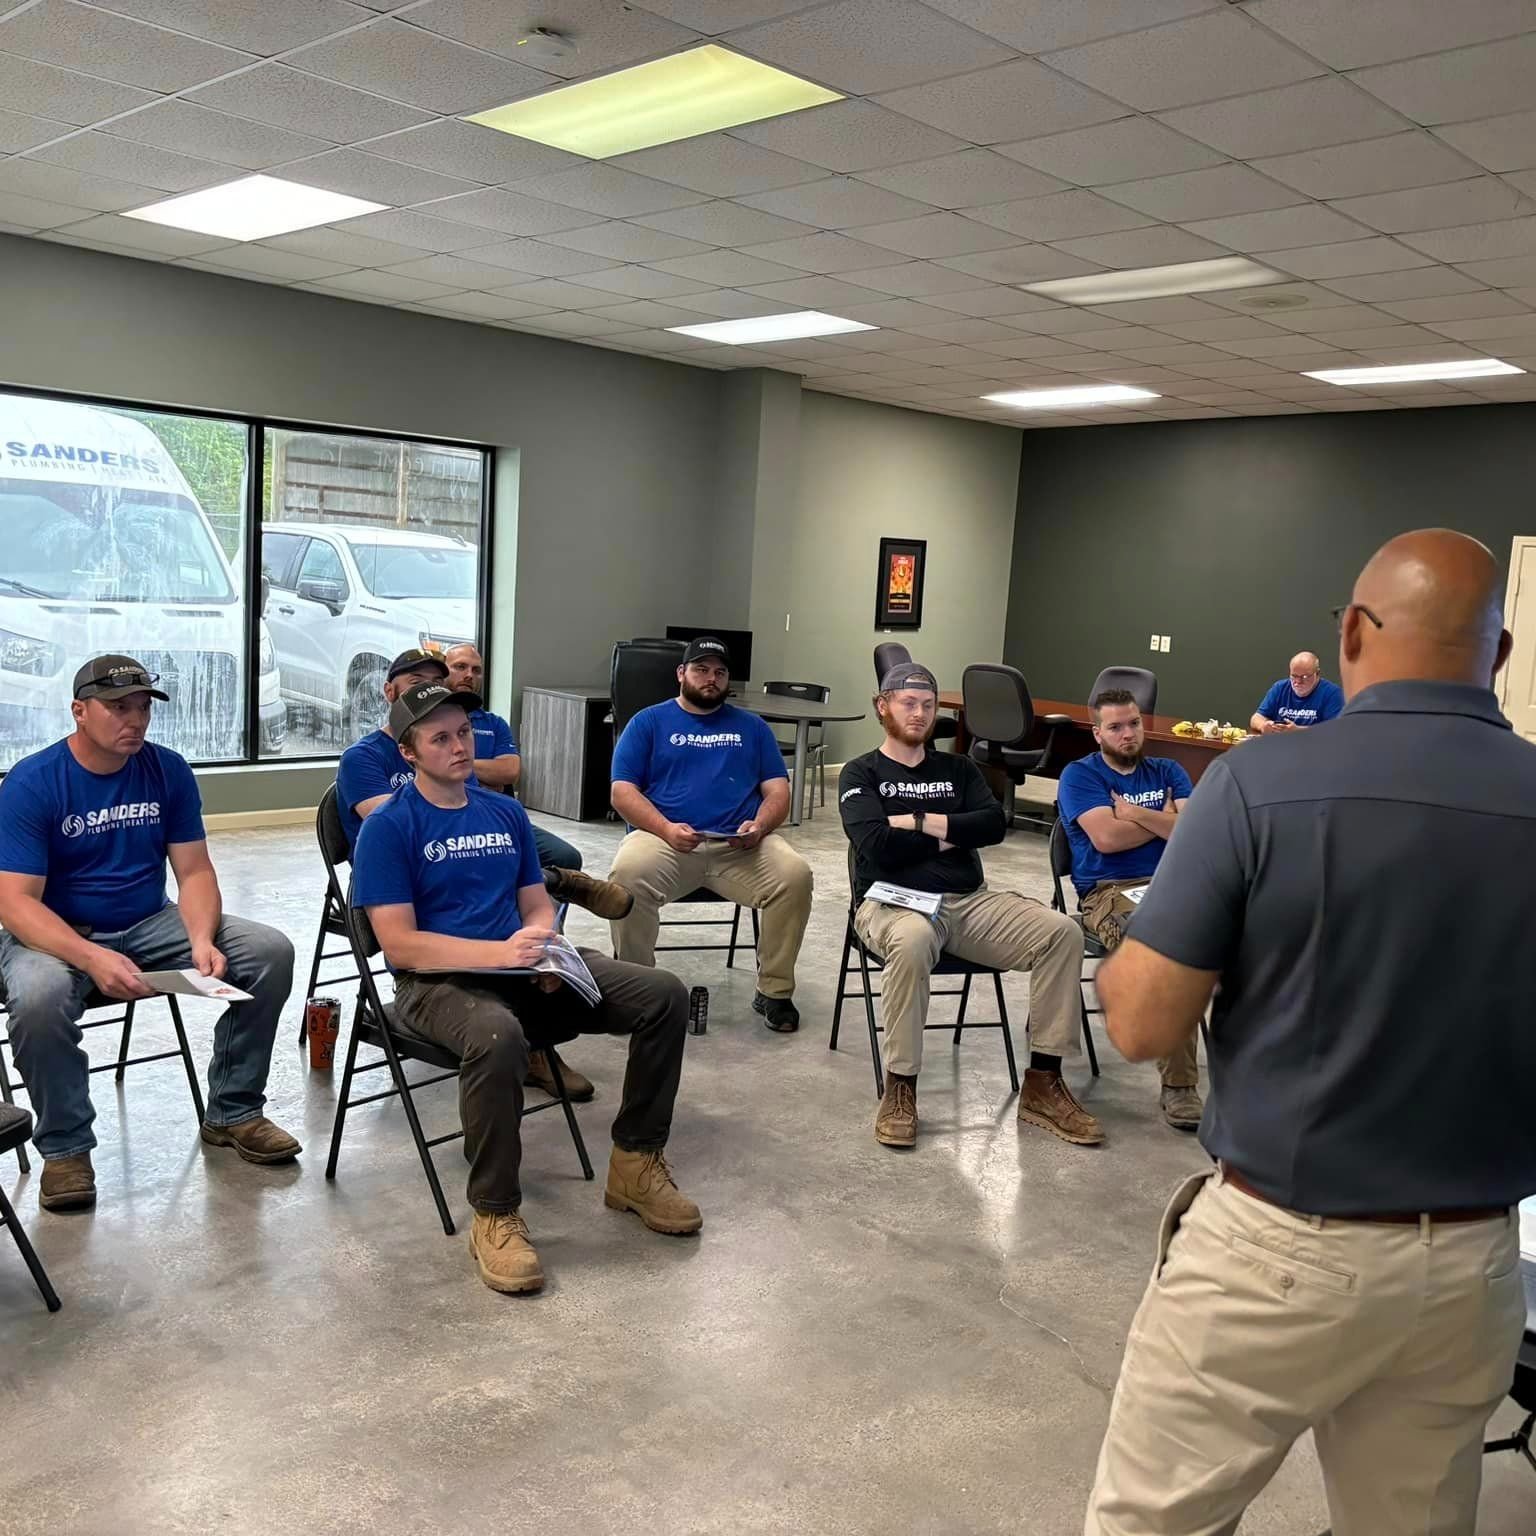 Our guys are getting continuing education on tankless water heaters this morning with @rinnai_america. 

We&rsquo;d love to give you a quote on endless hot water and review the benefits of a tankless unit with you. Just give us a call!